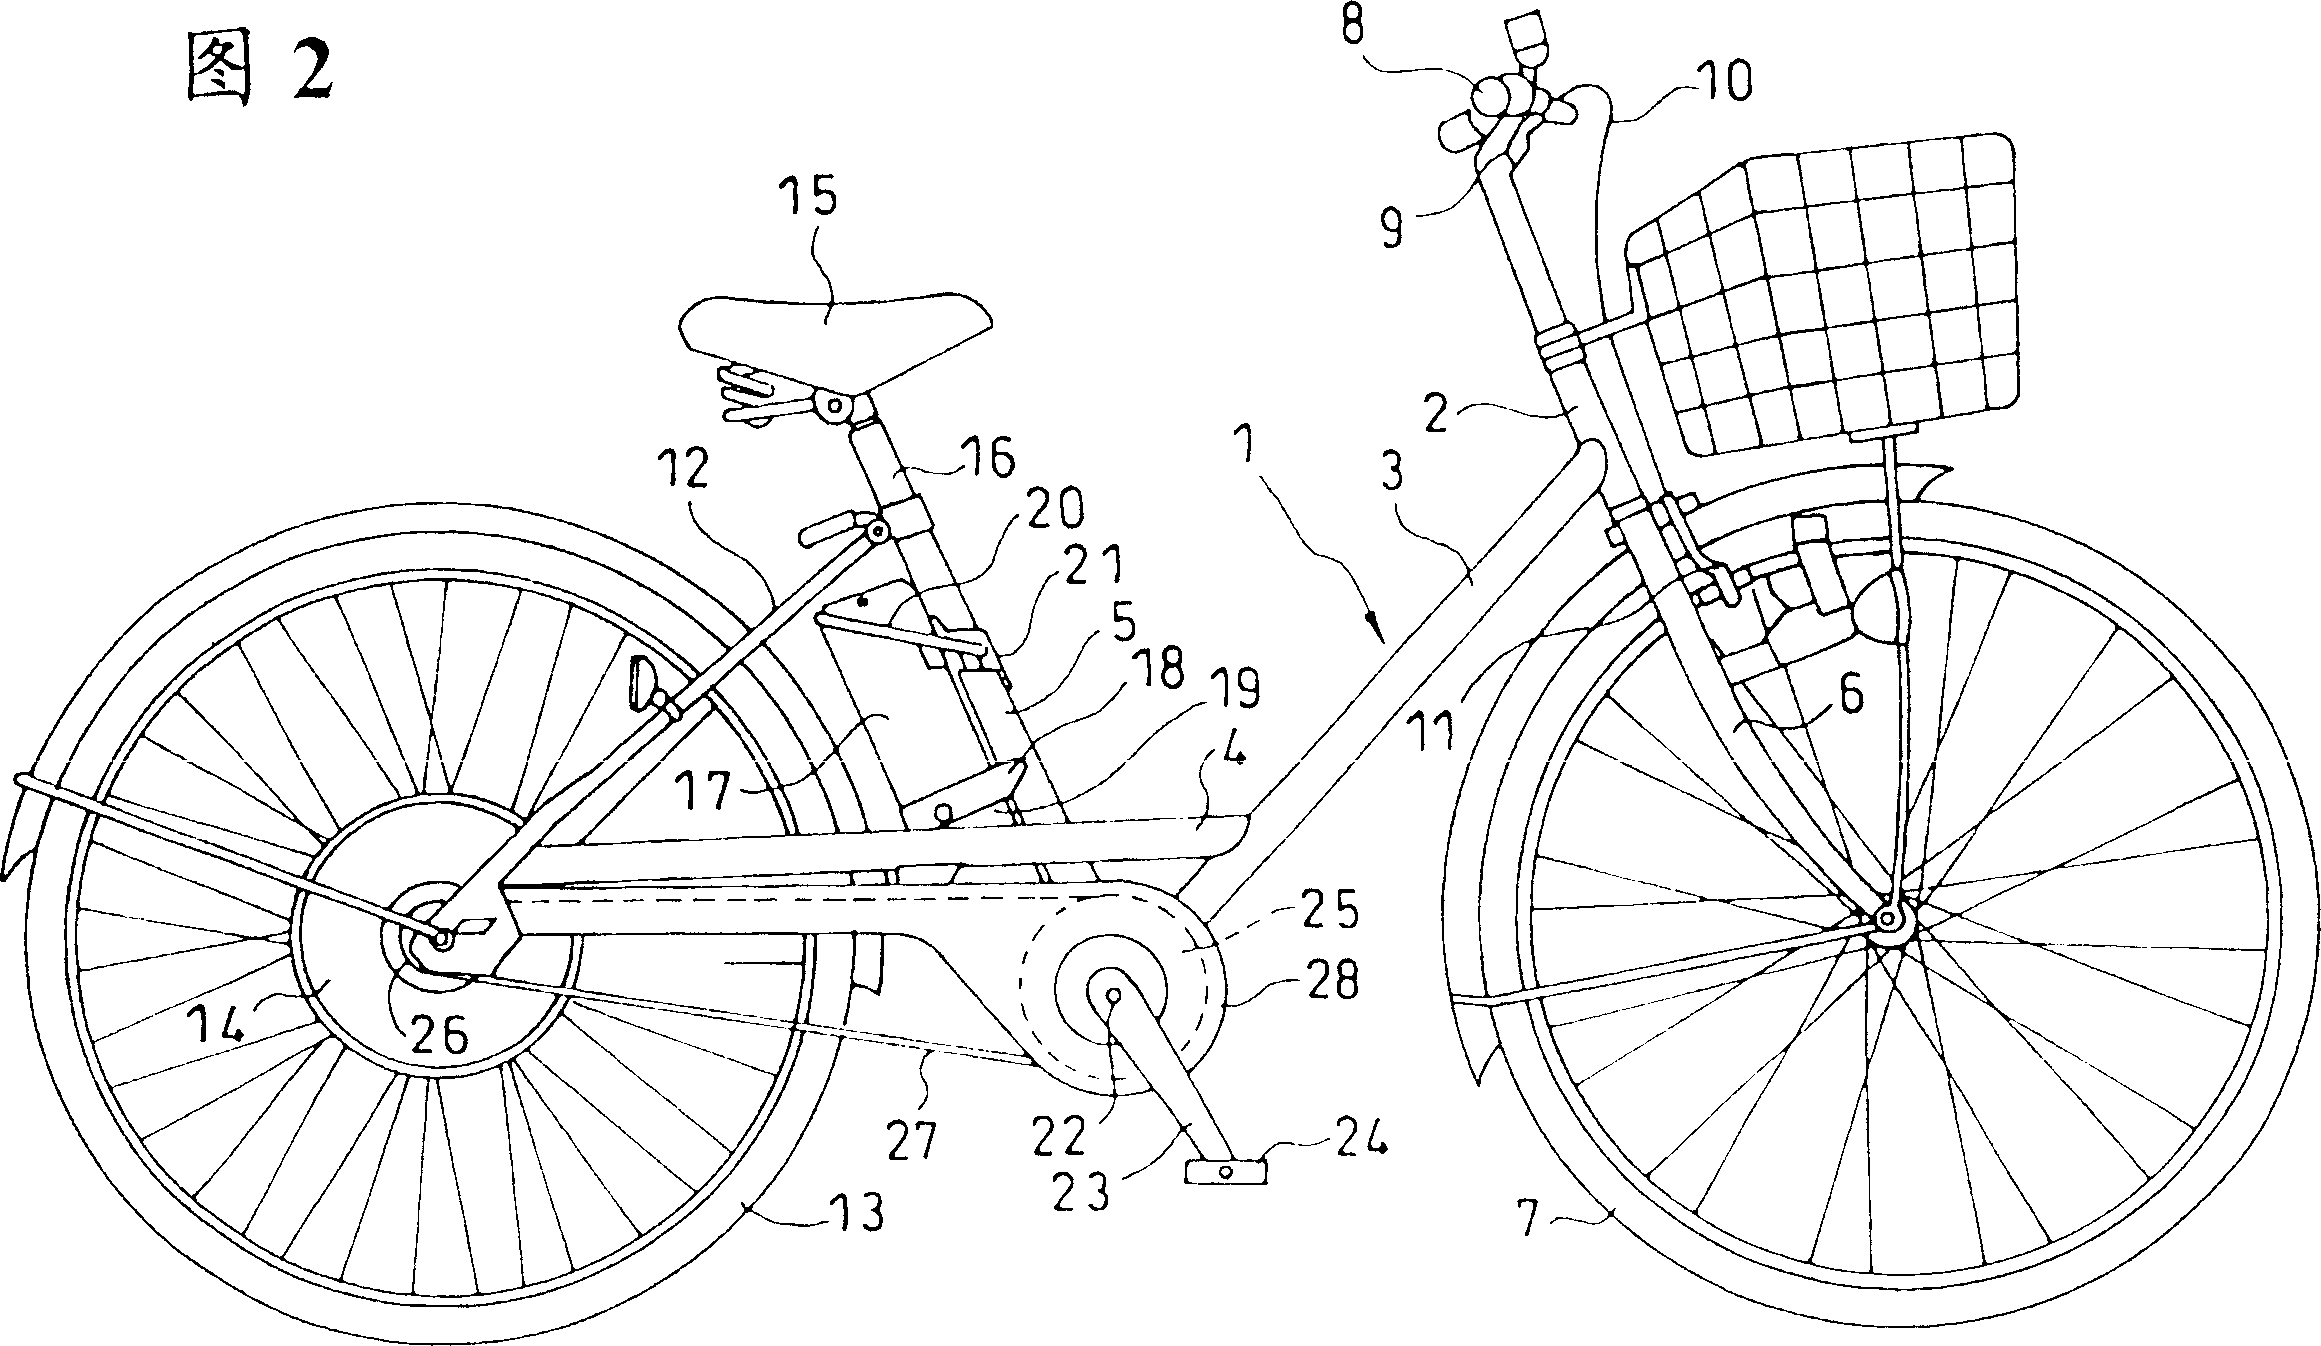 Electric-aid bicycle